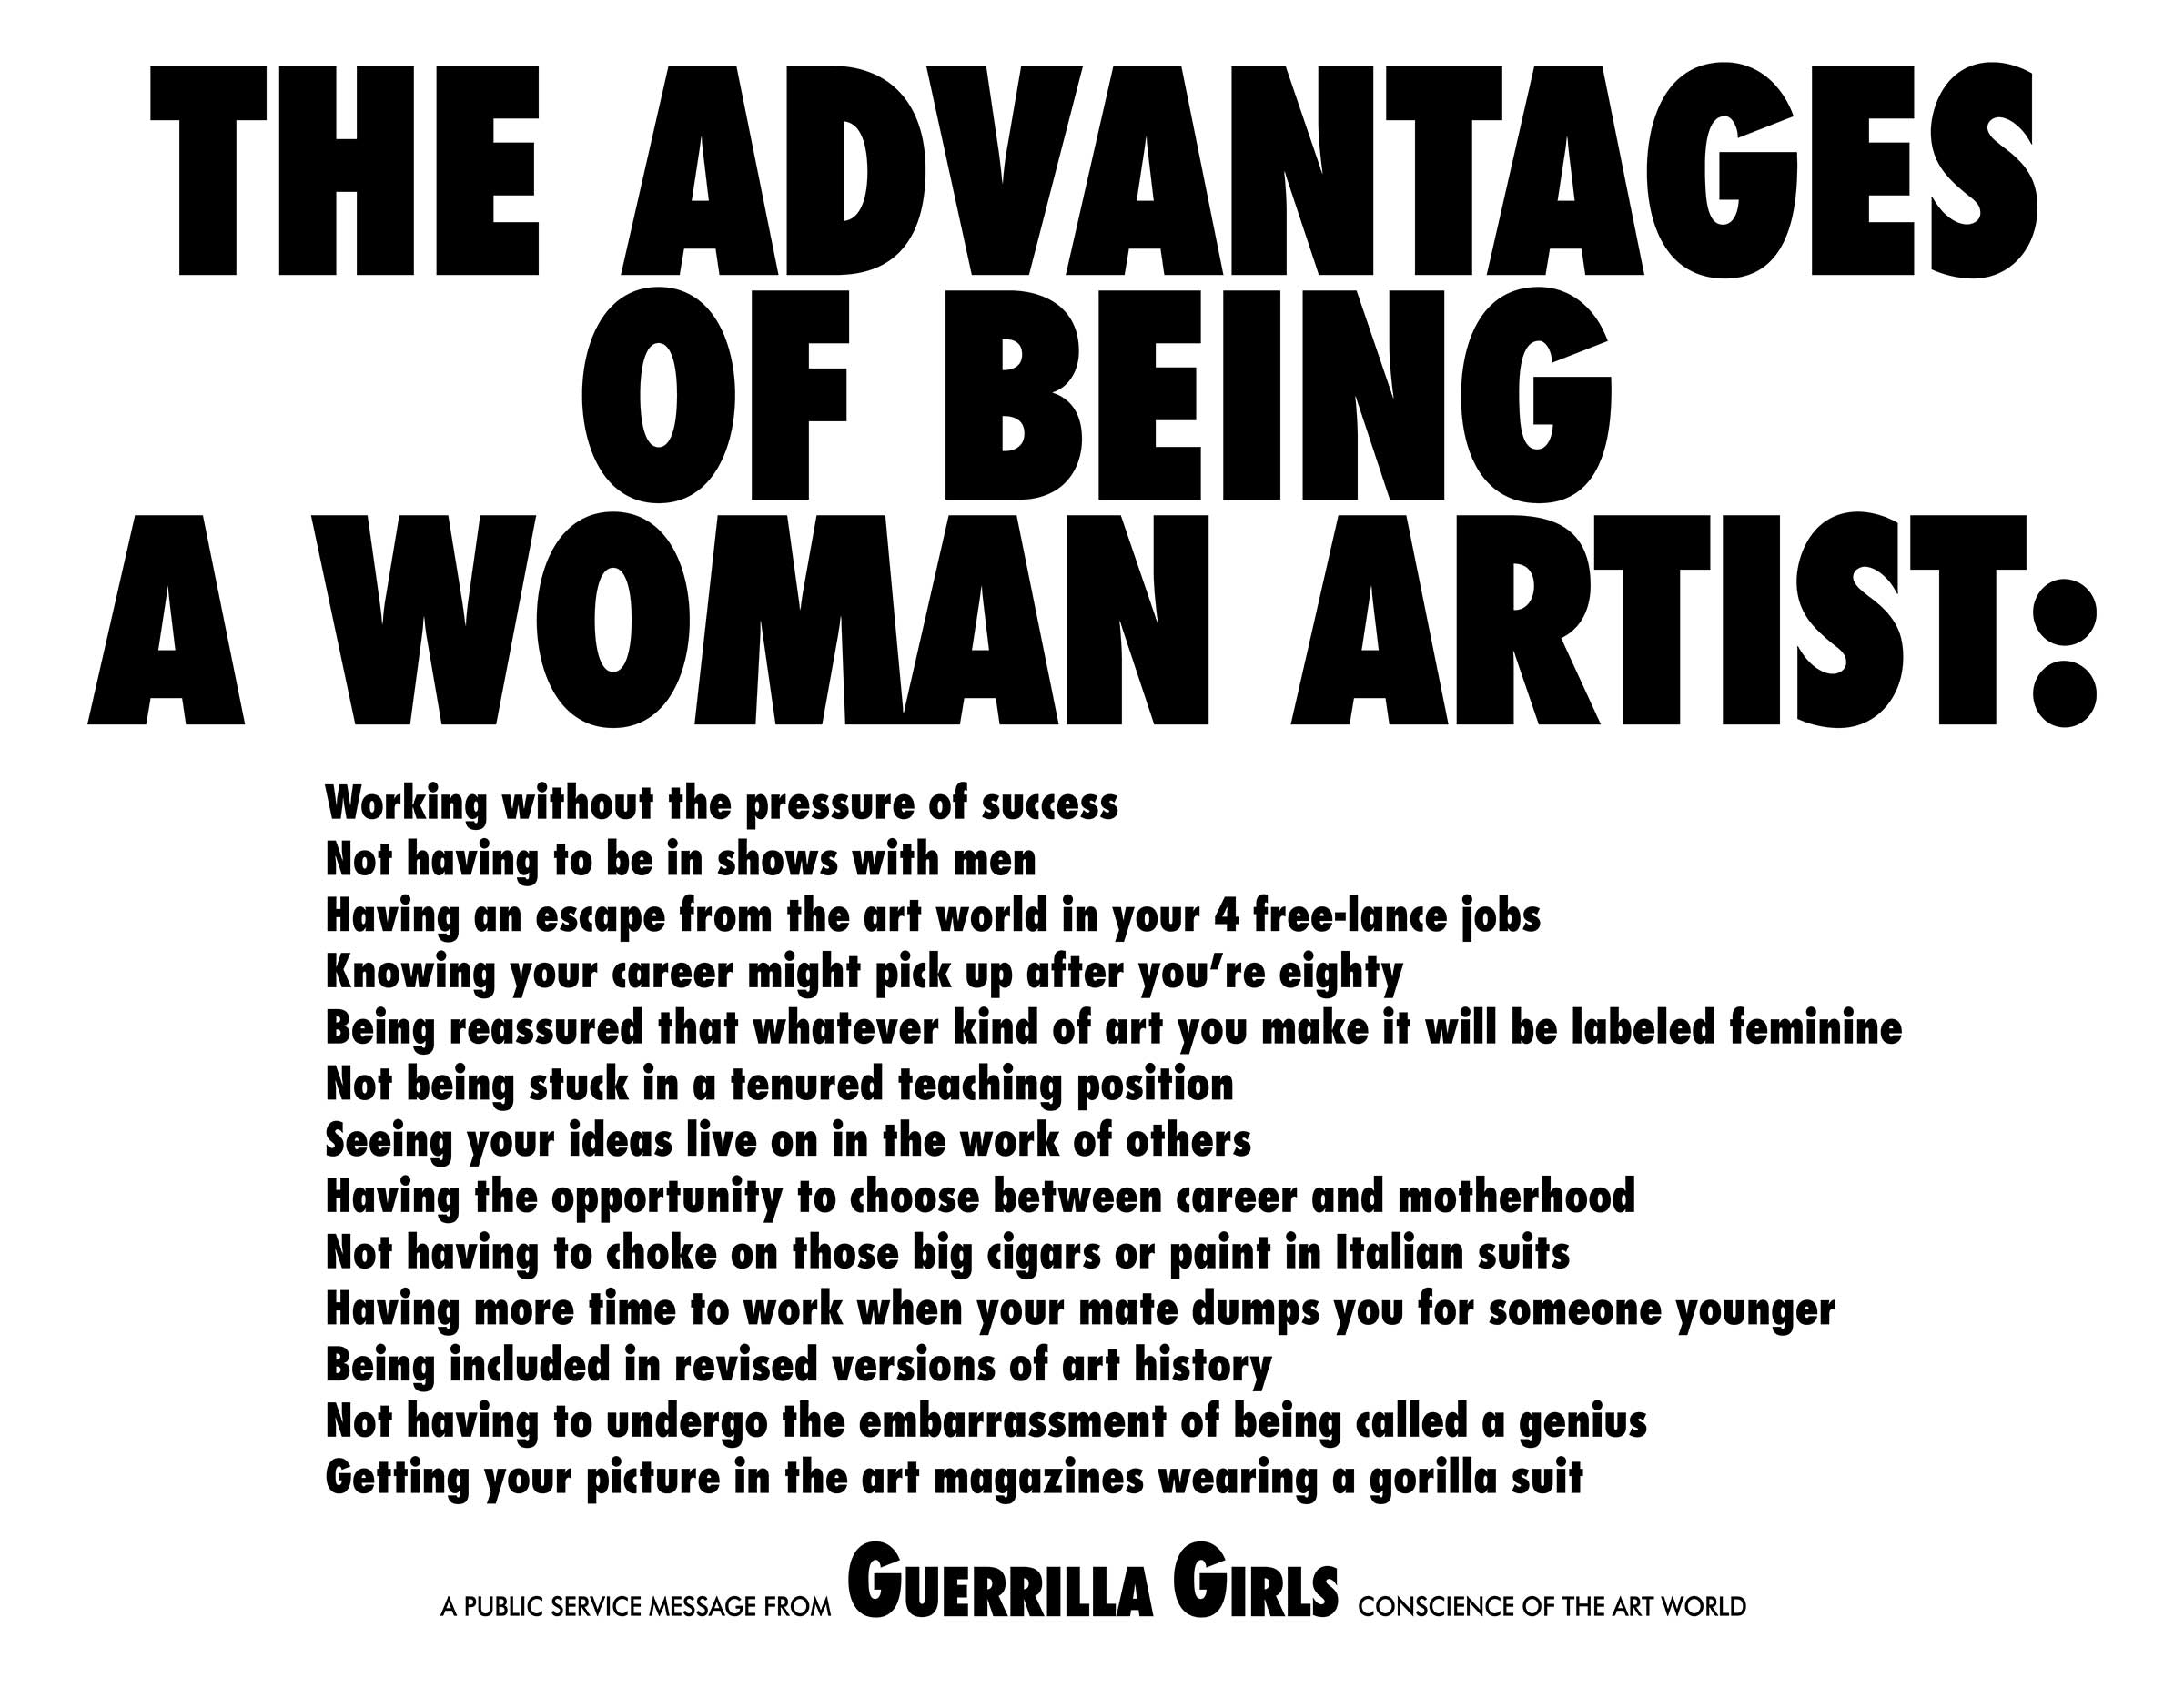 The Guerrilla Girls - The Advantages of Being a Woman Artist, 1988